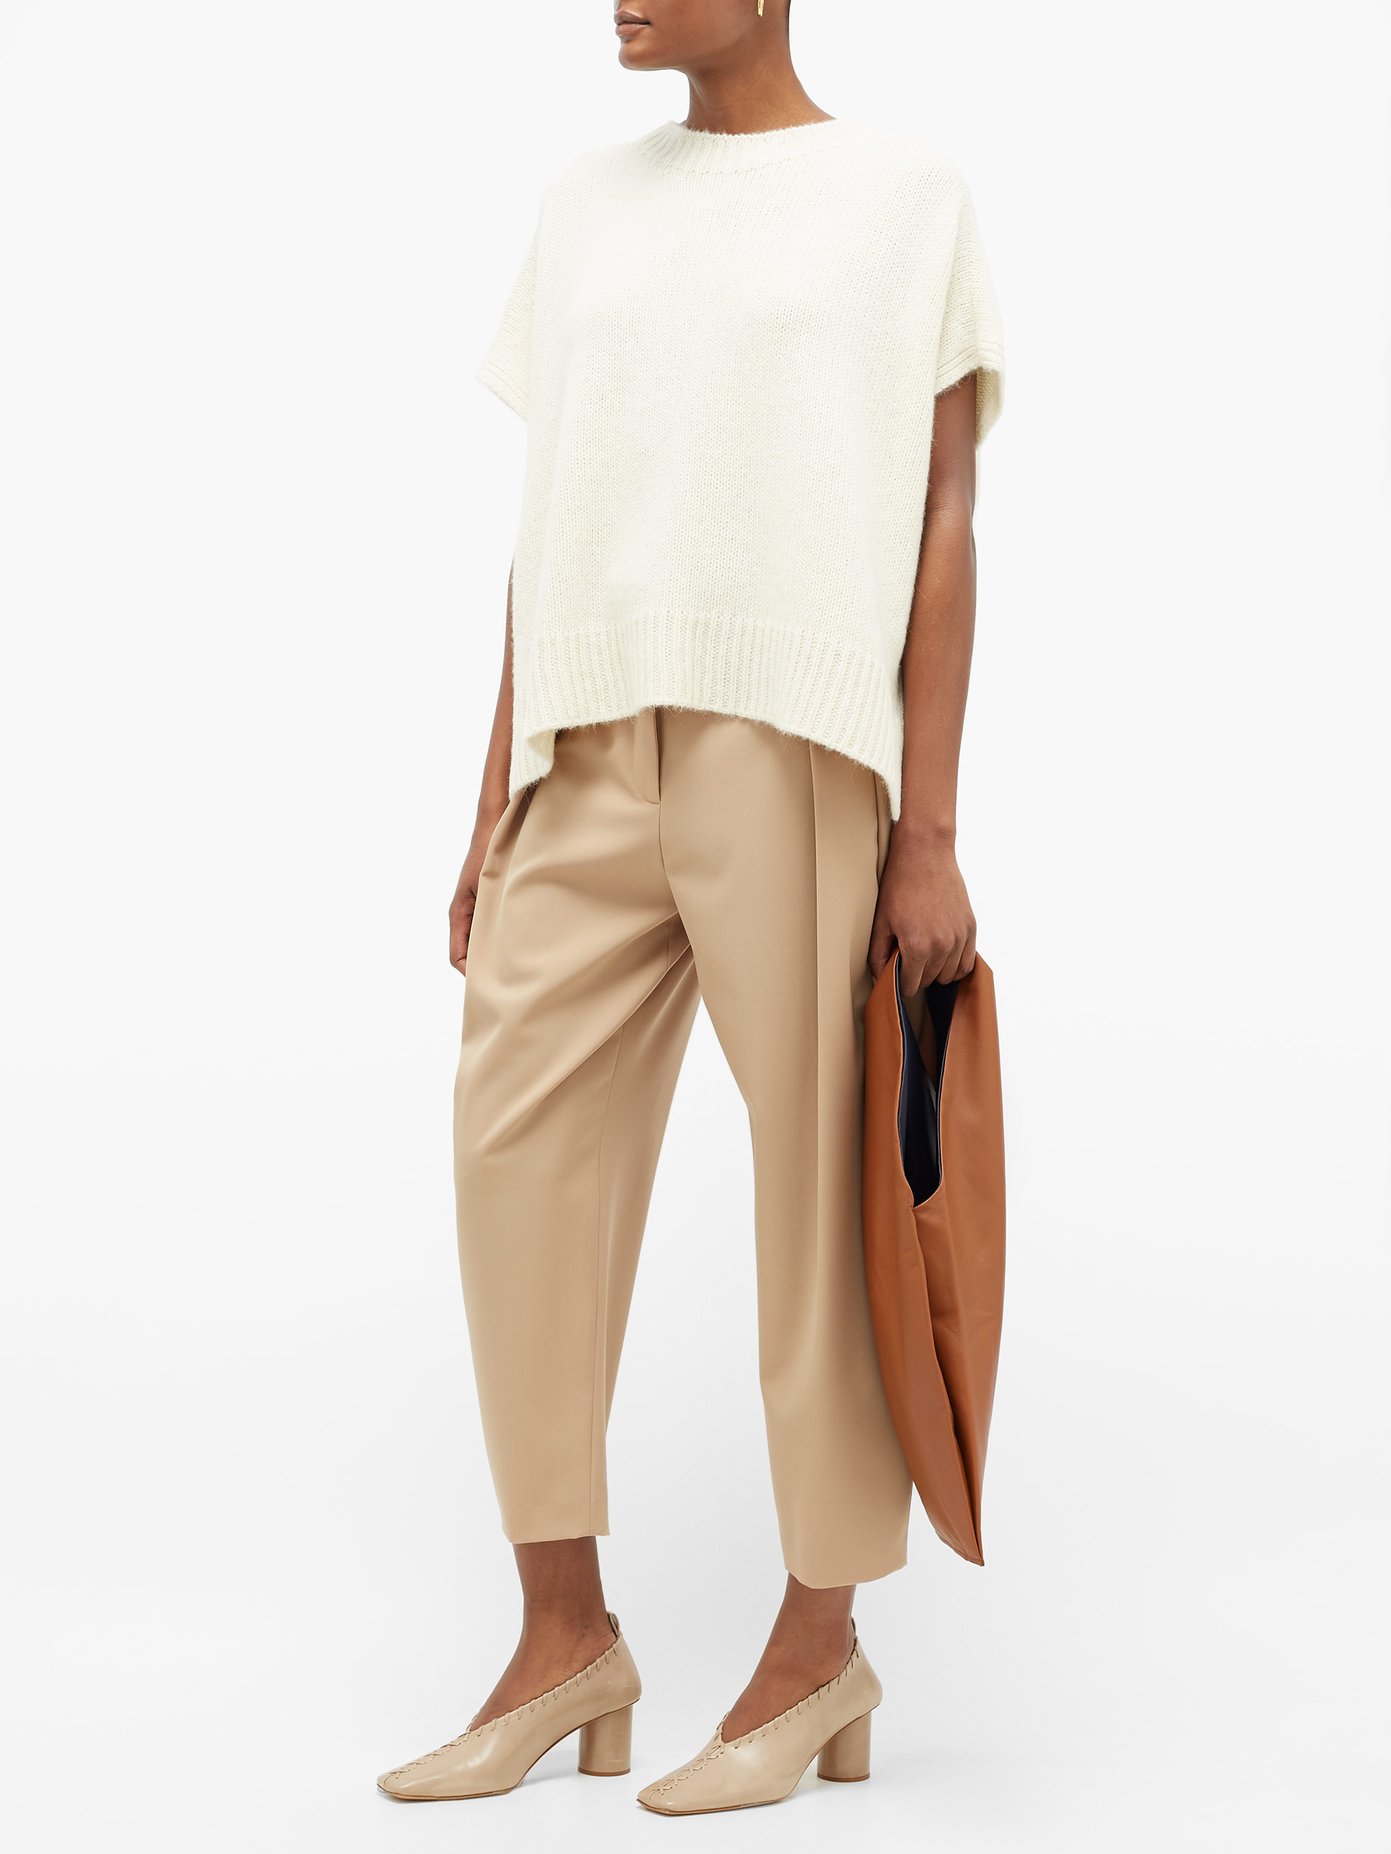 https://assetsprx.matchesfashion.com/img/product/outfit_1326580_1_zoom.jpg